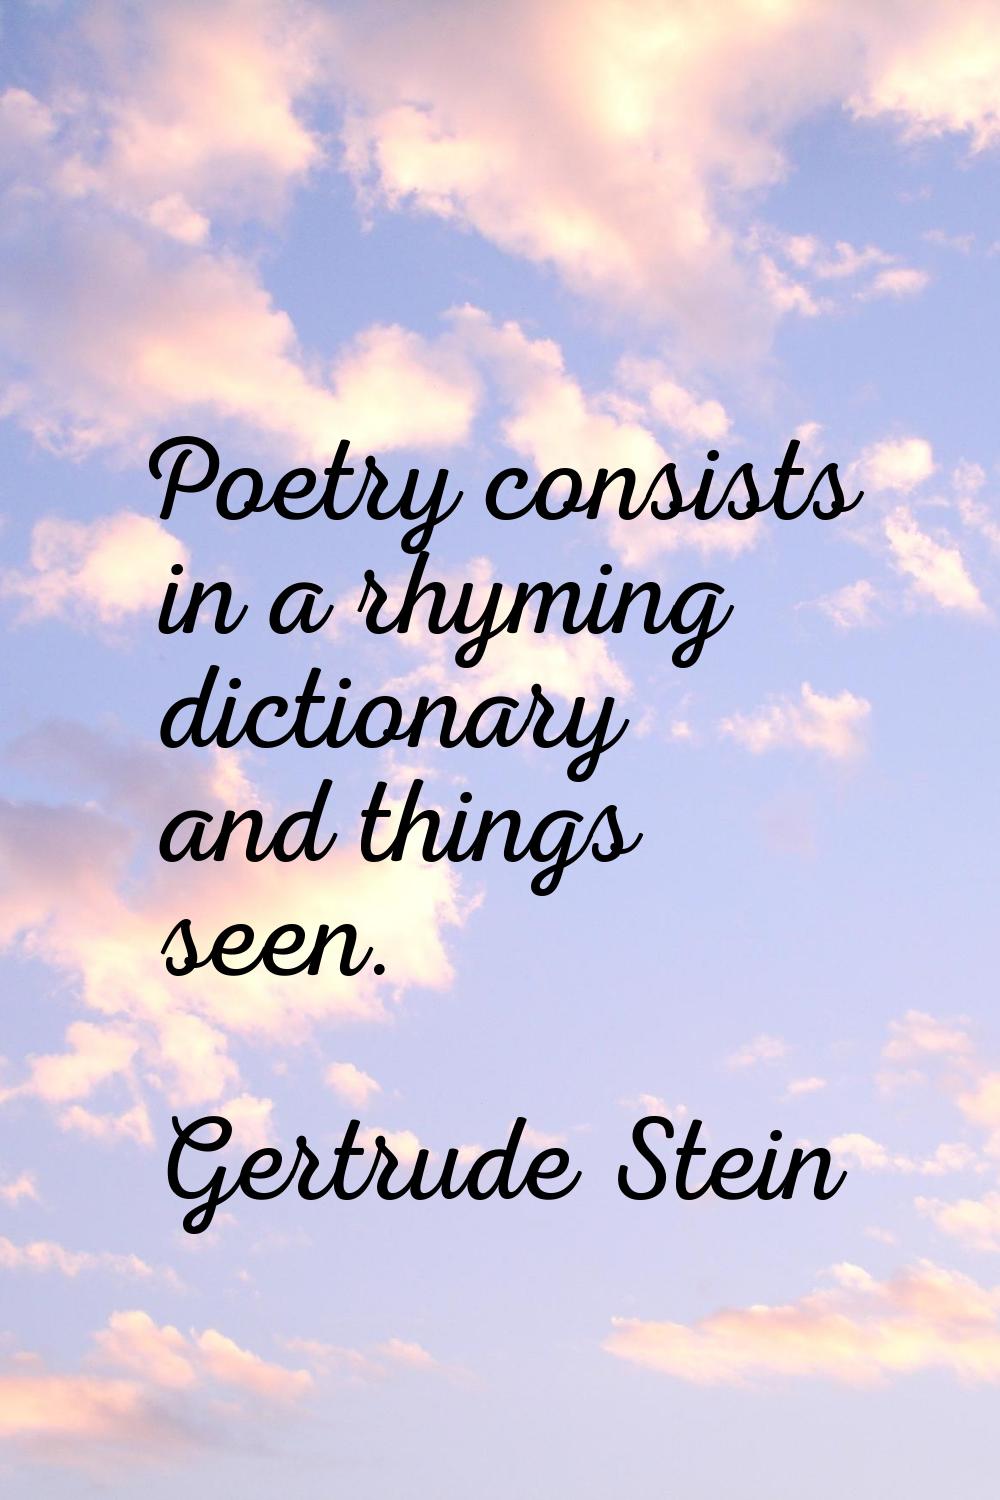 Poetry consists in a rhyming dictionary and things seen.